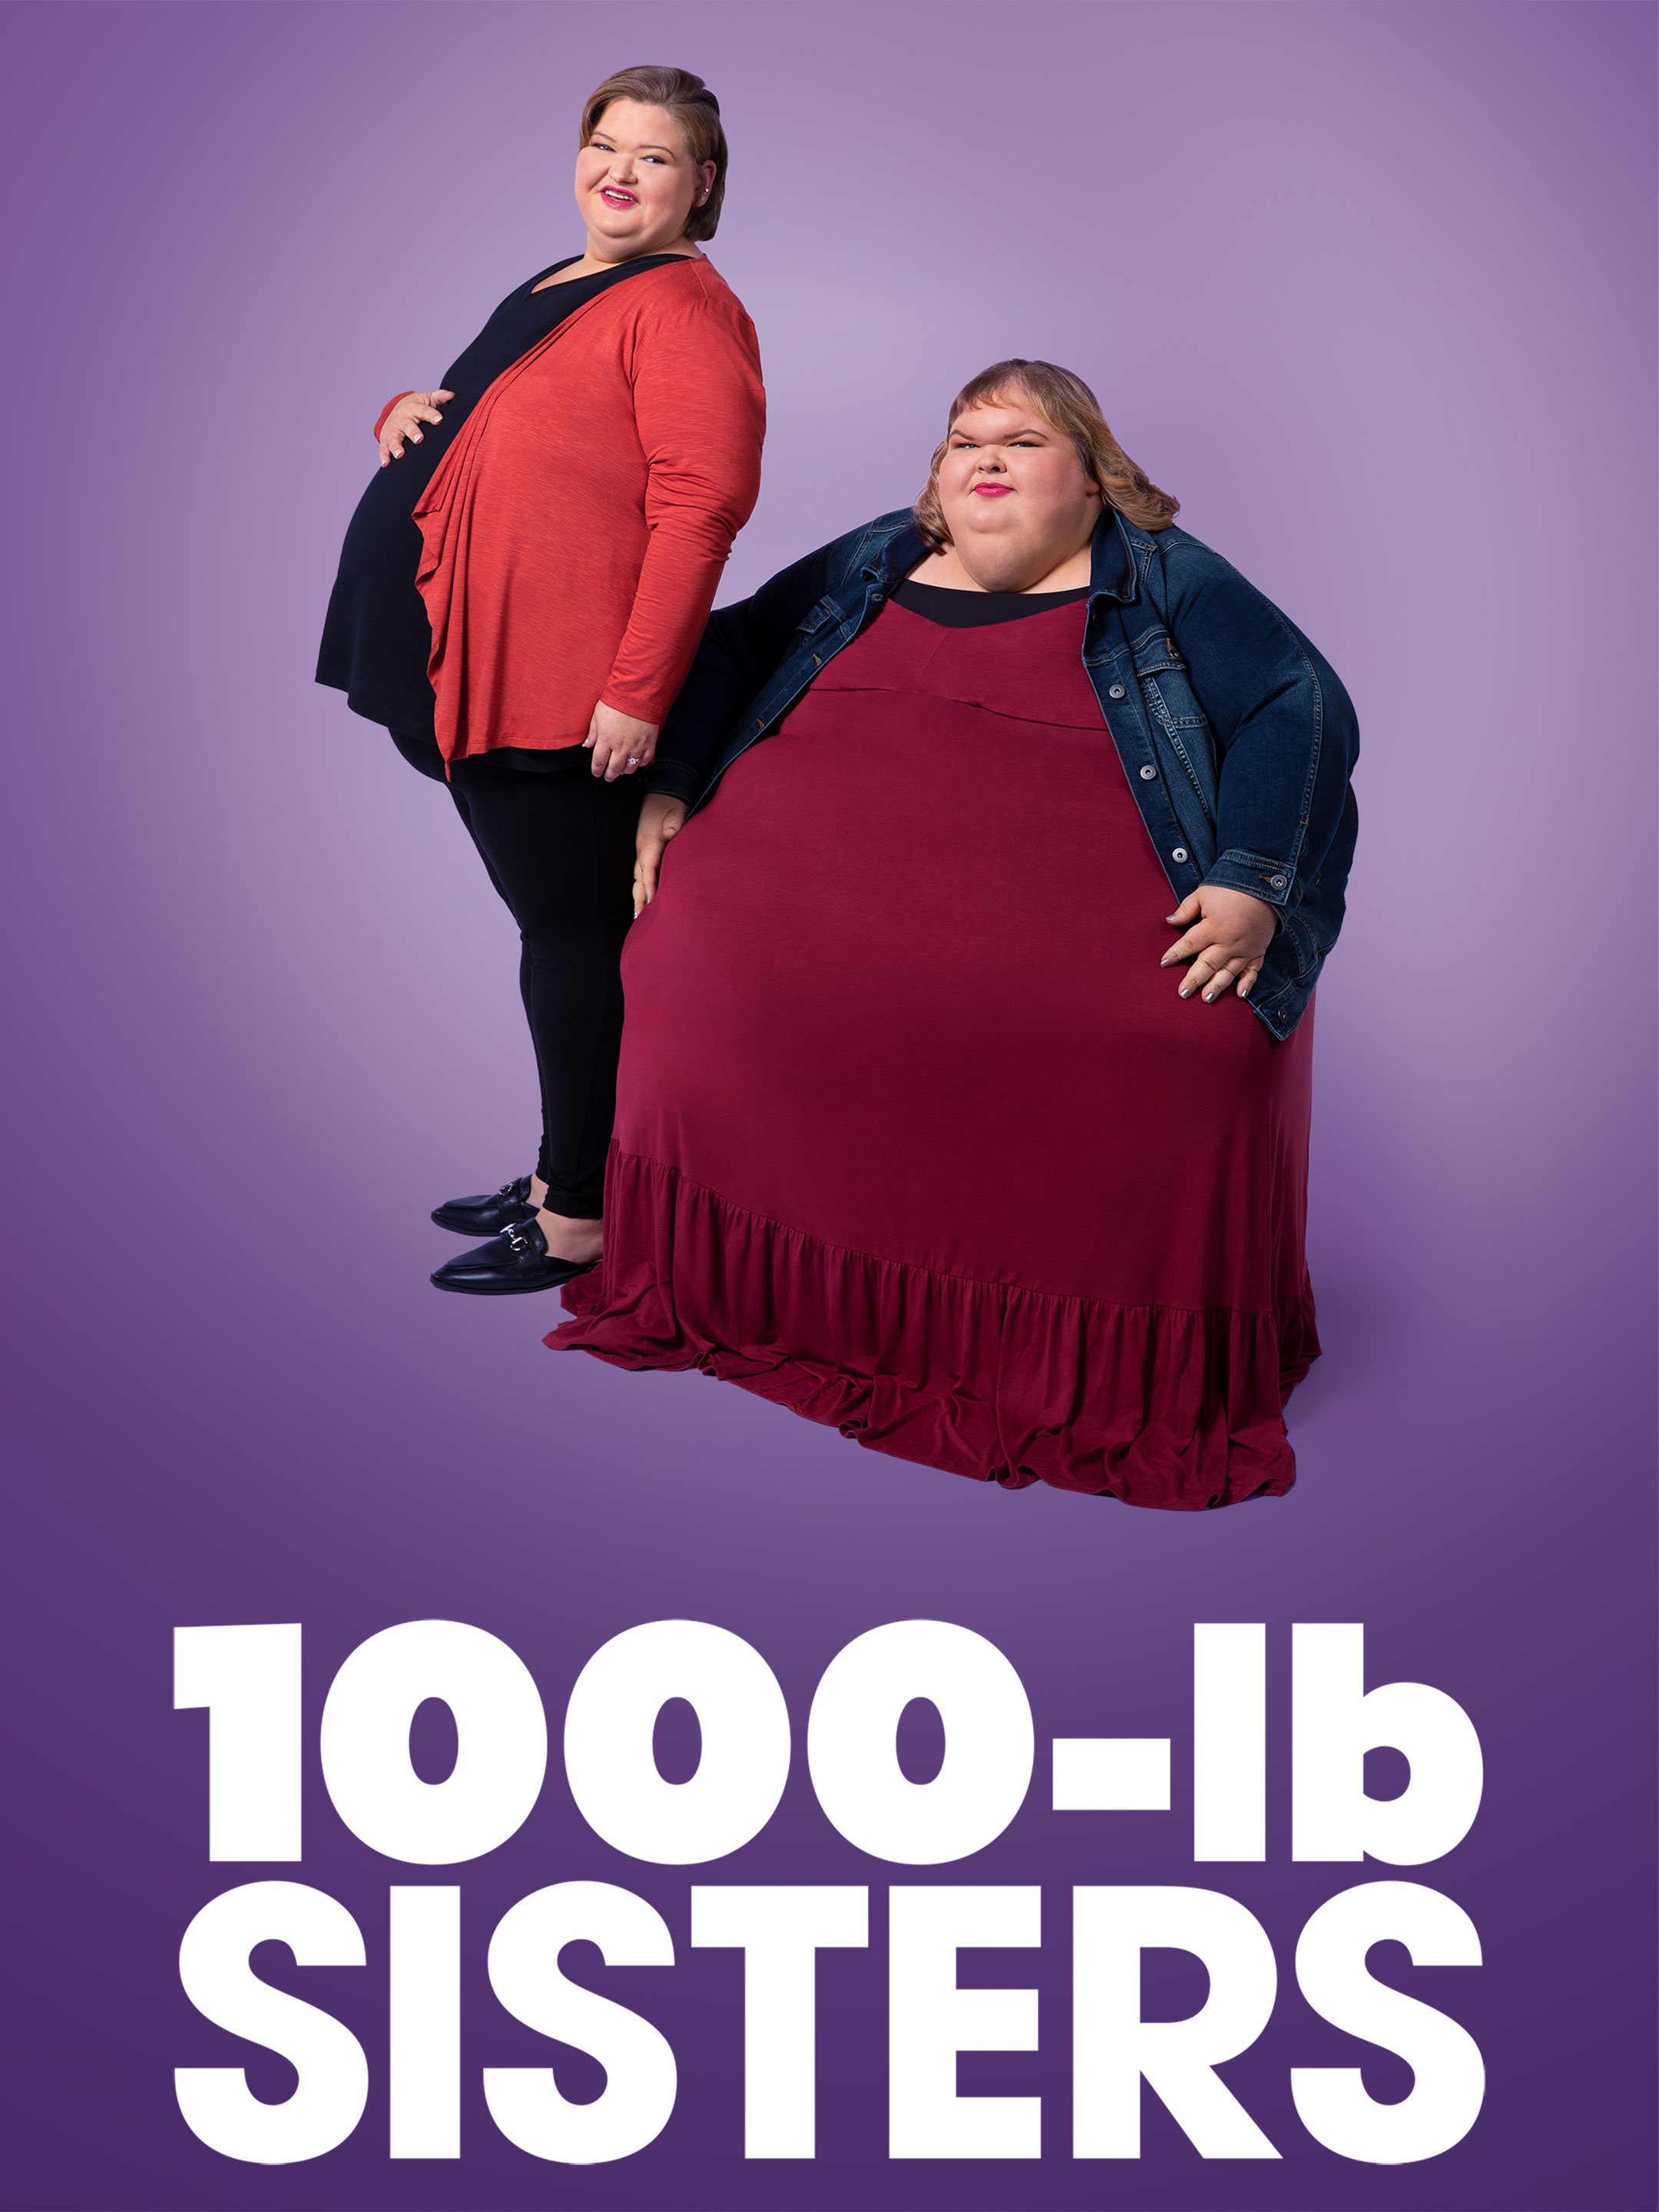 1000-lb Sisters - Where to Watch and Stream - TV Guide